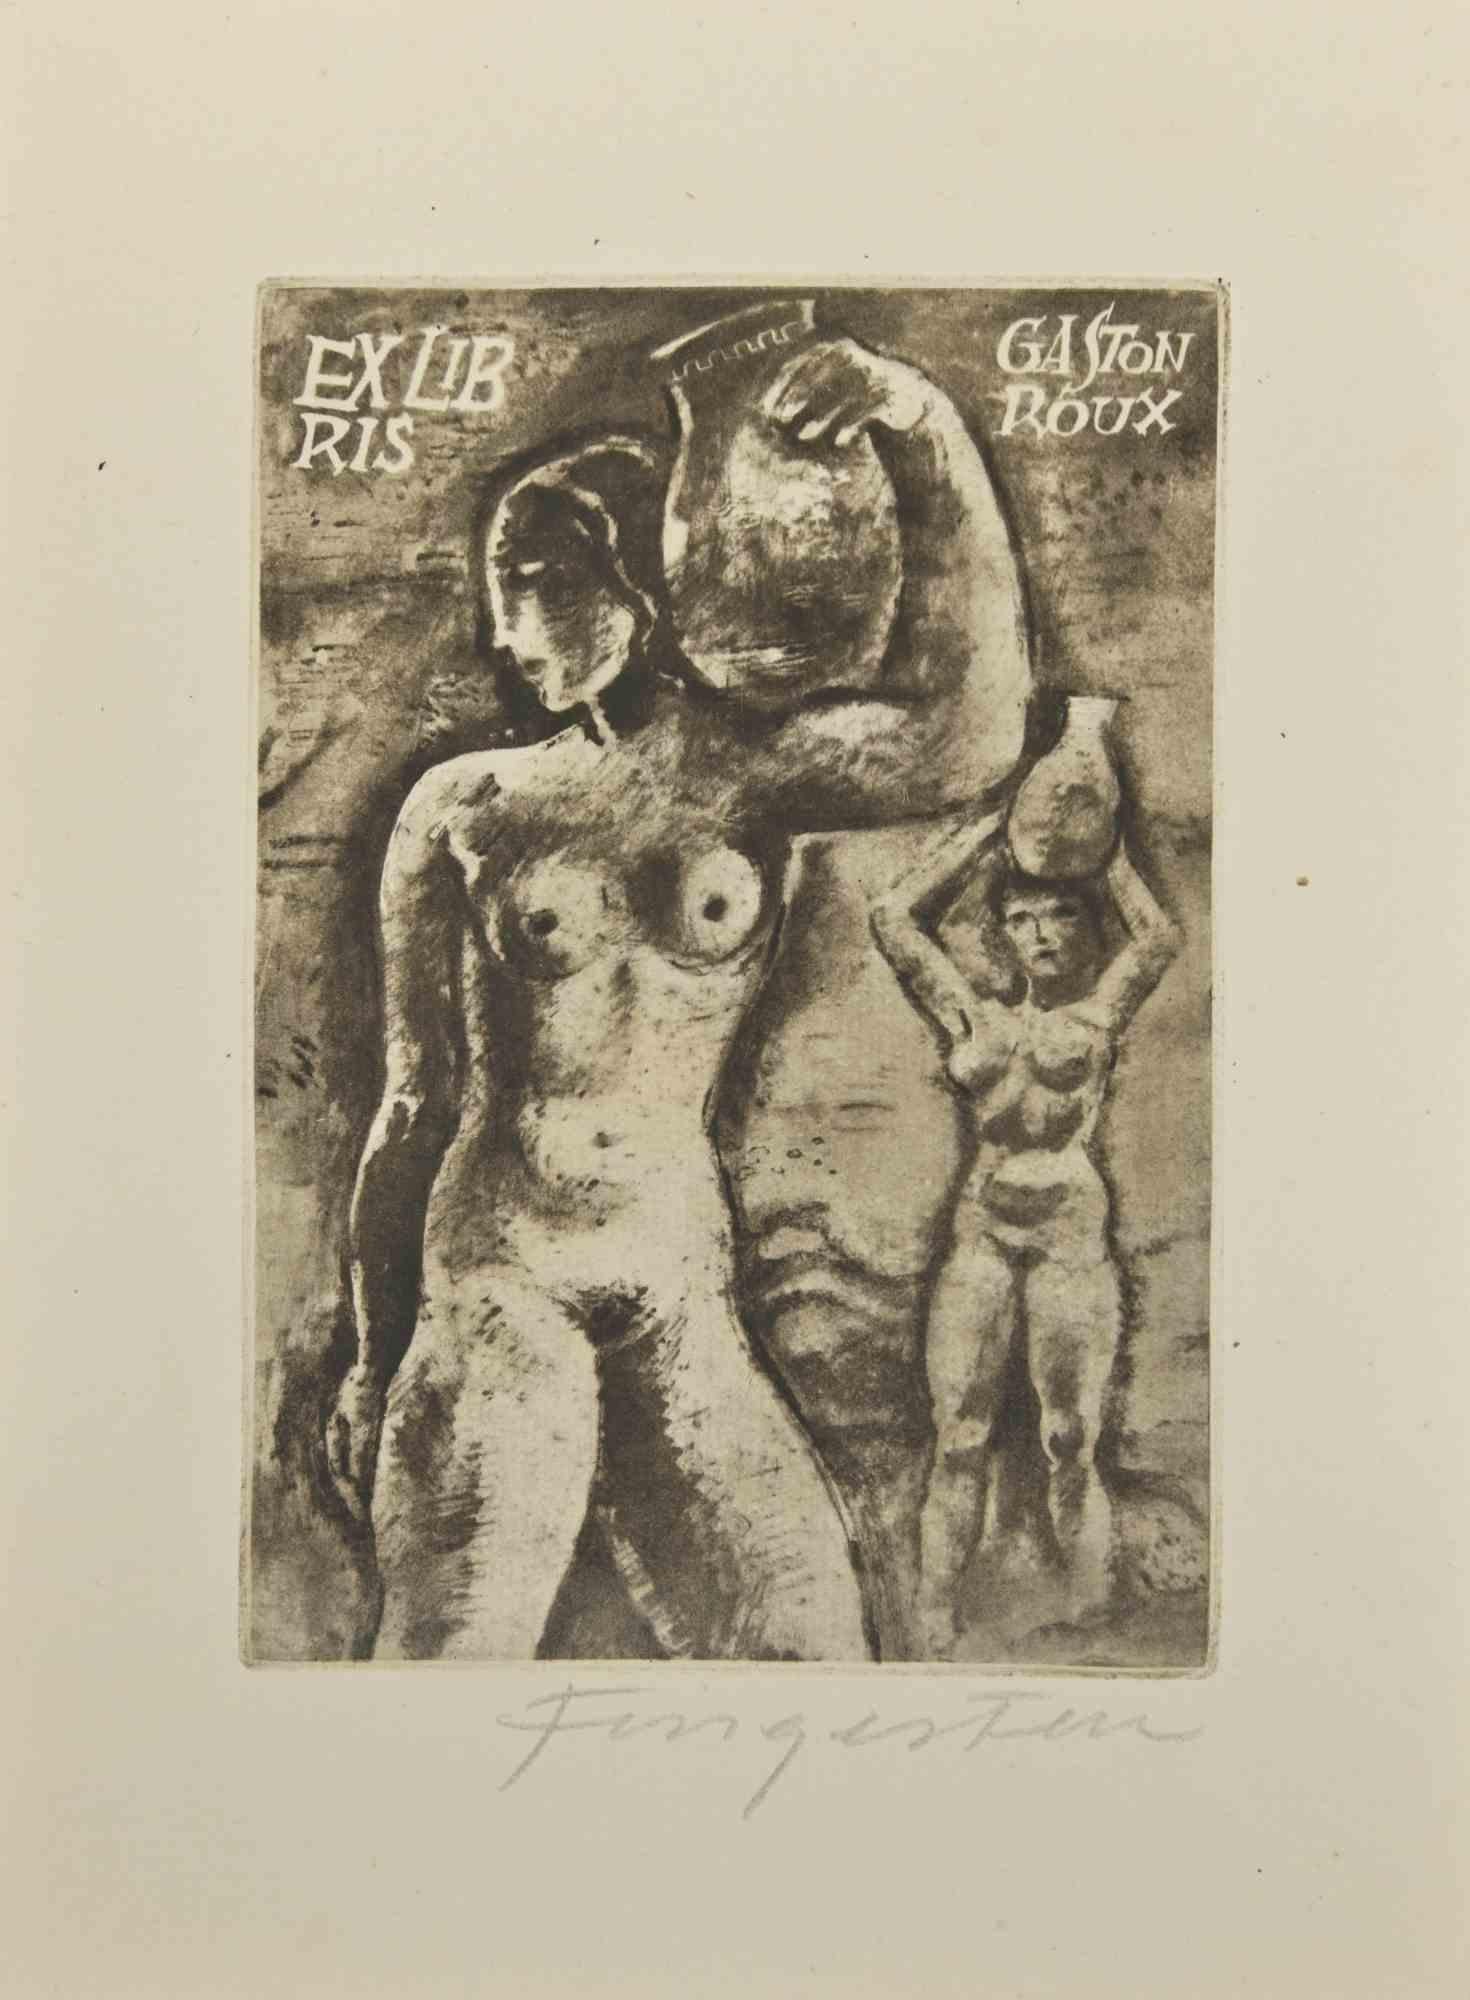  Ex Libris - Gaston Roux is an Etching print created by Michel Fingesten.

Hand signed on the lower margin.

Good conditions.

Michel Fingesten (1884 - 1943) was a Czech painter and engraver of Jewish origin. He is considered one of the greatest Ex